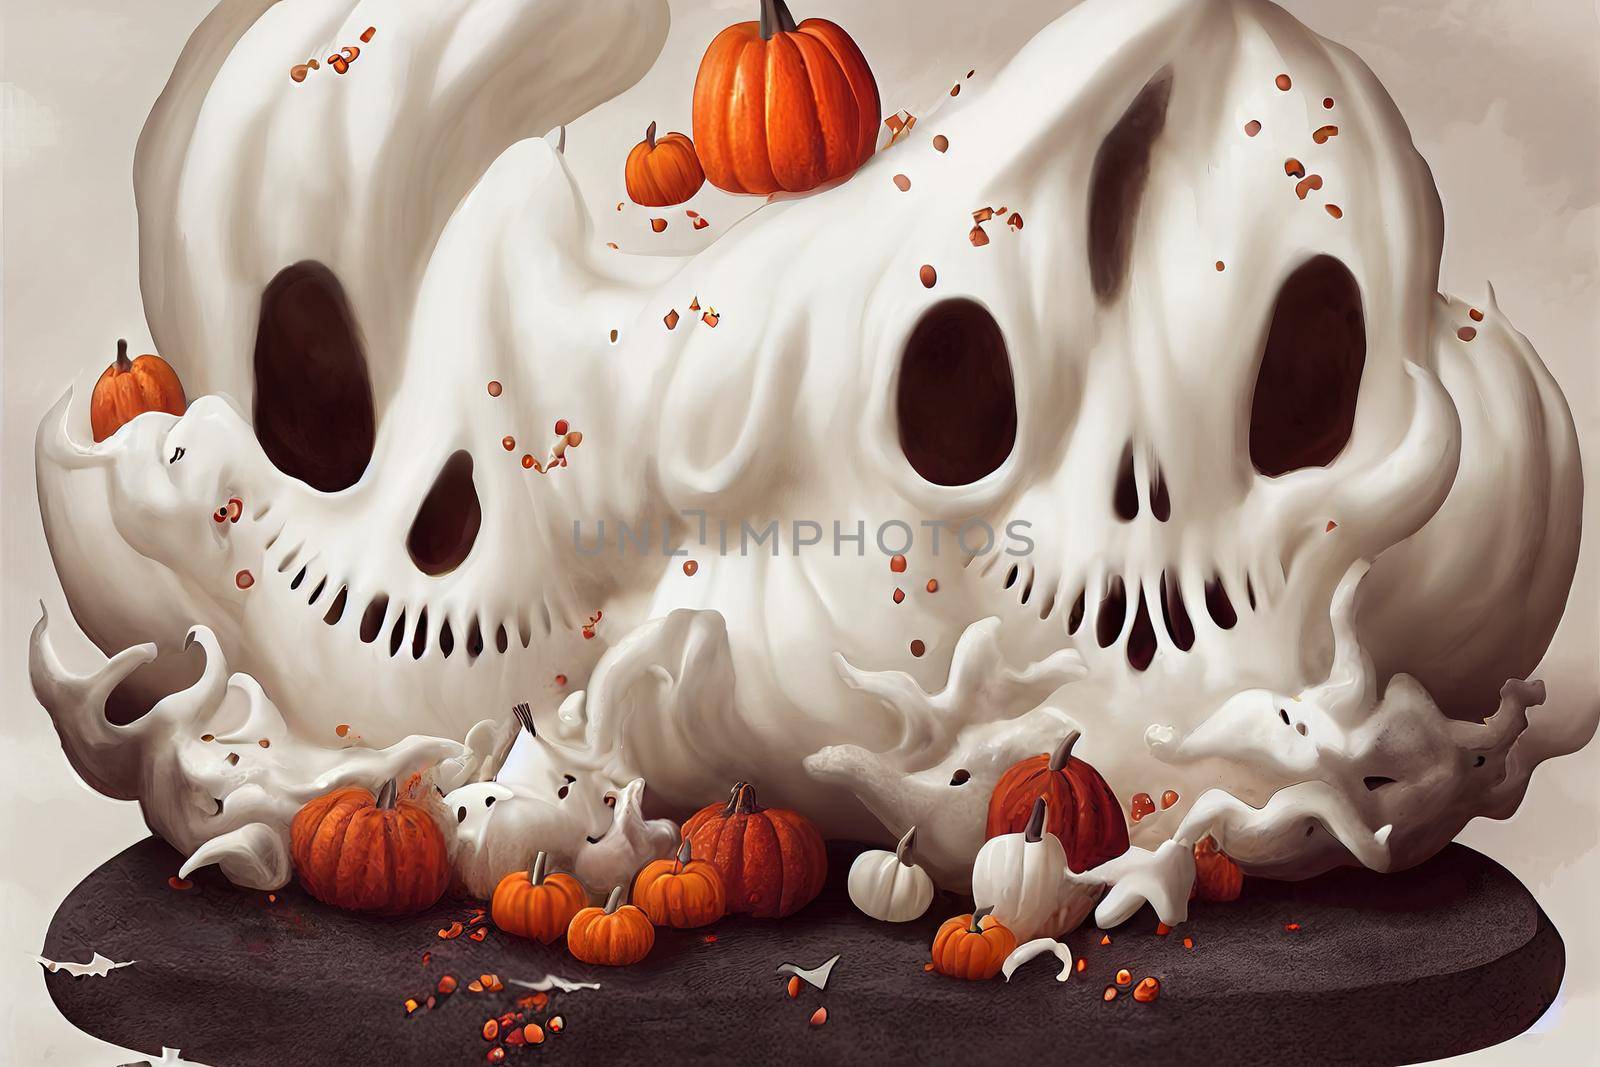 Funny and delicious meringue ghoast for halloween party decor 2d style, illustration, design v1